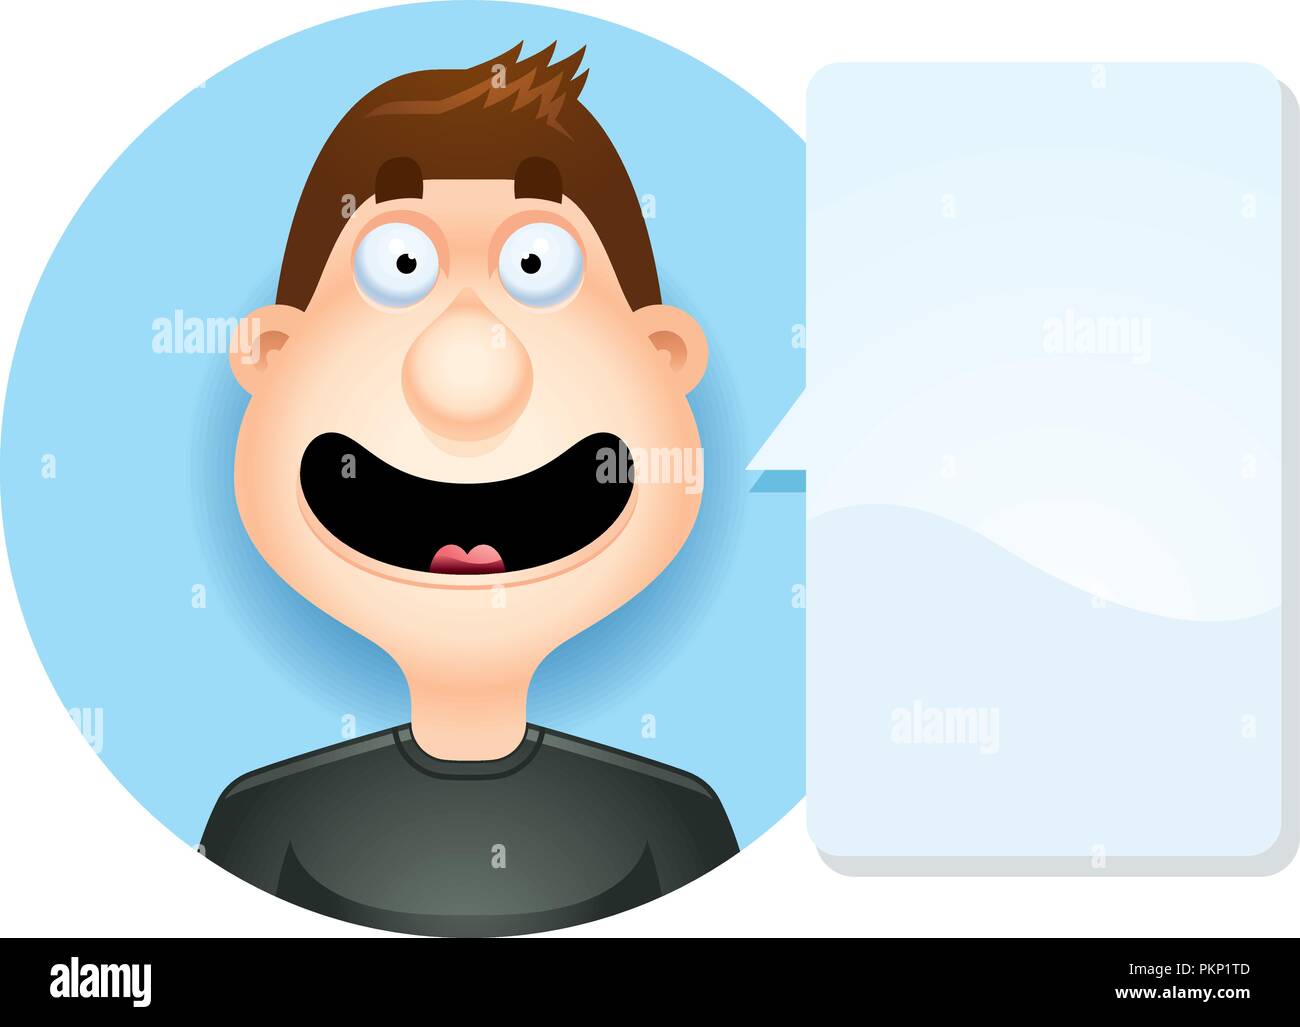 A cartoon illustration of a brunette man smiling  looking happy. Stock Vector